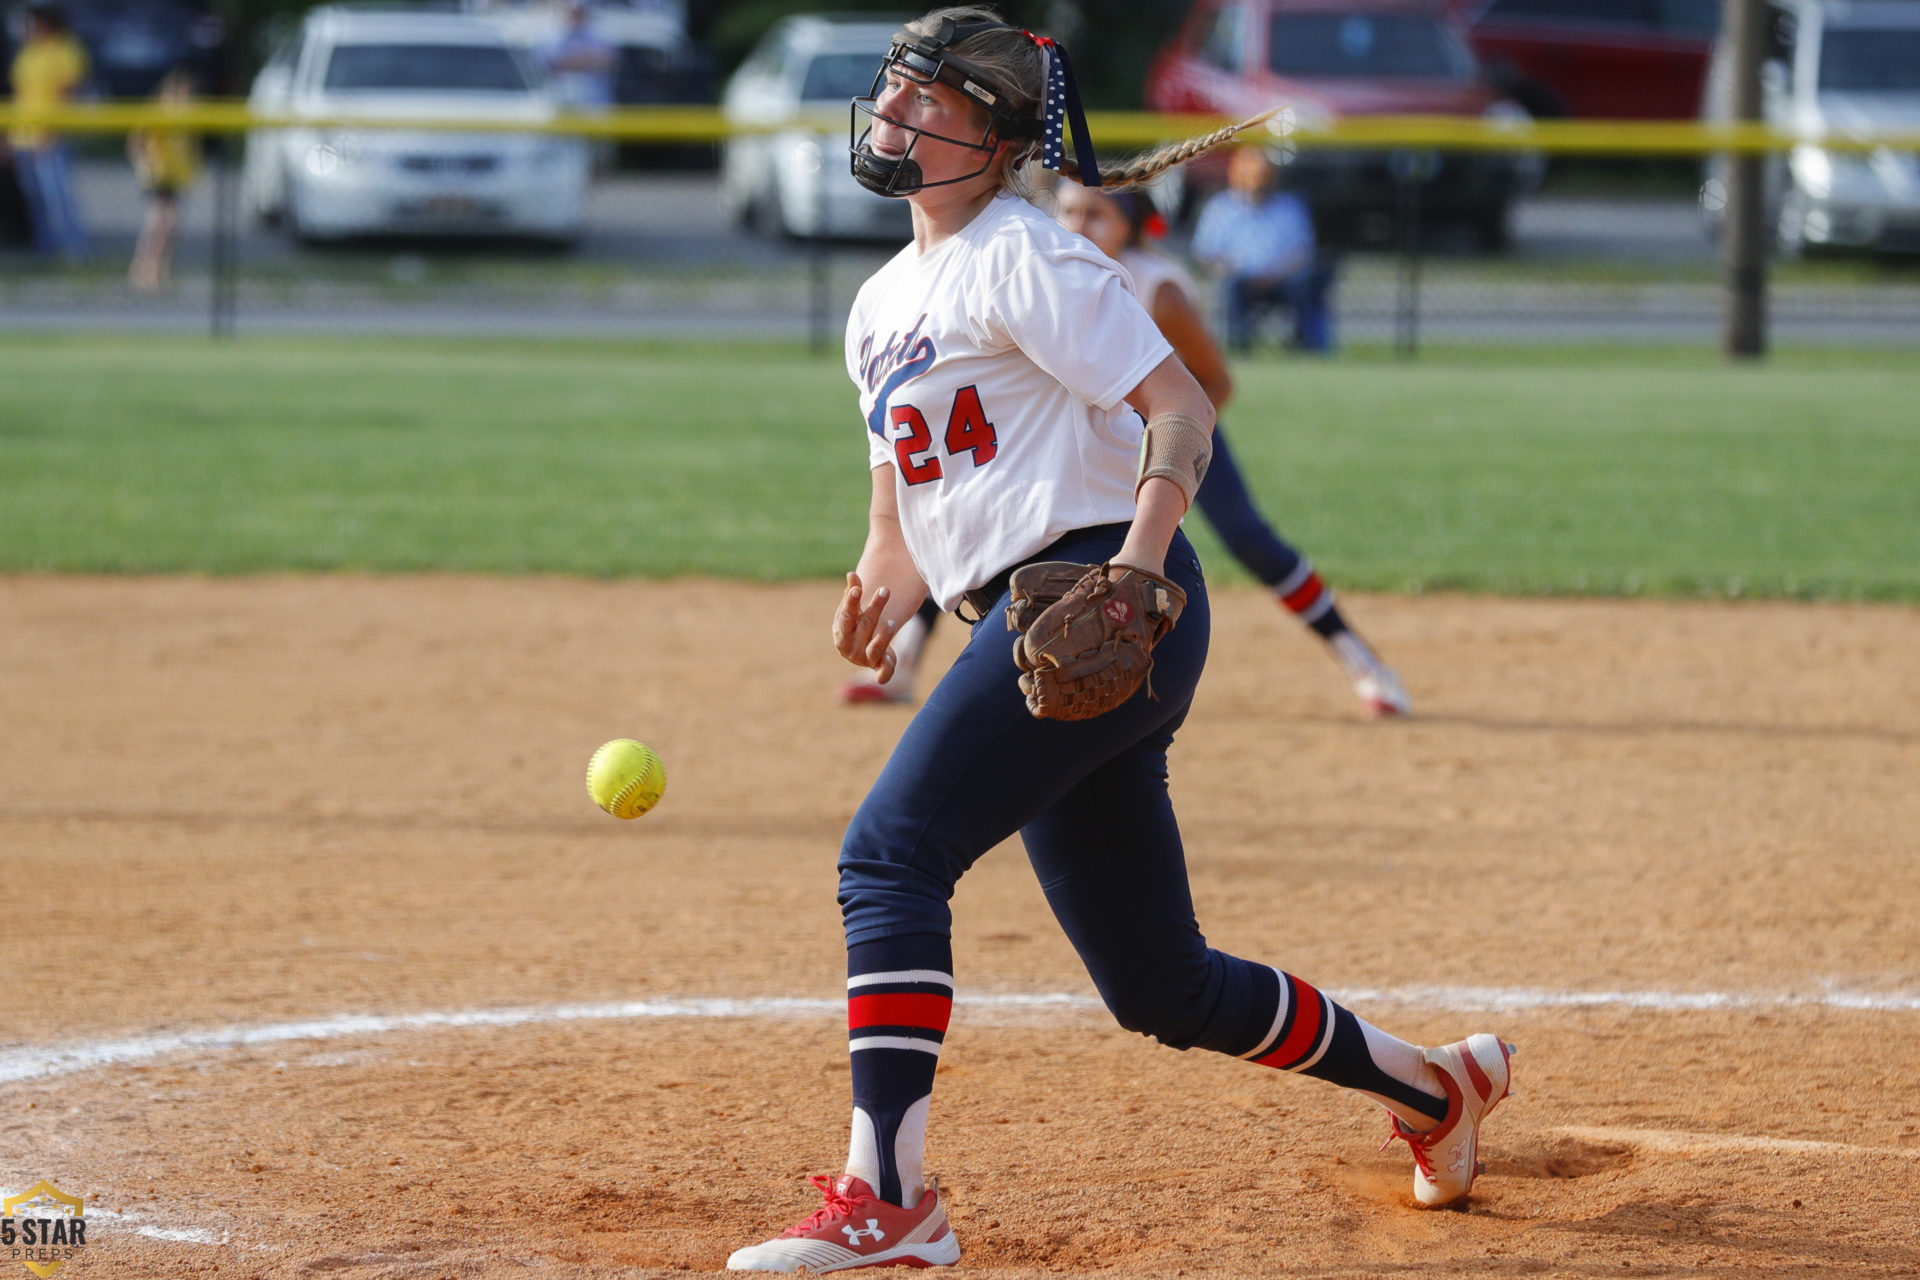 2019 All-5Star Preps Softball Pitcher of the Year: Catelyn Riley ...